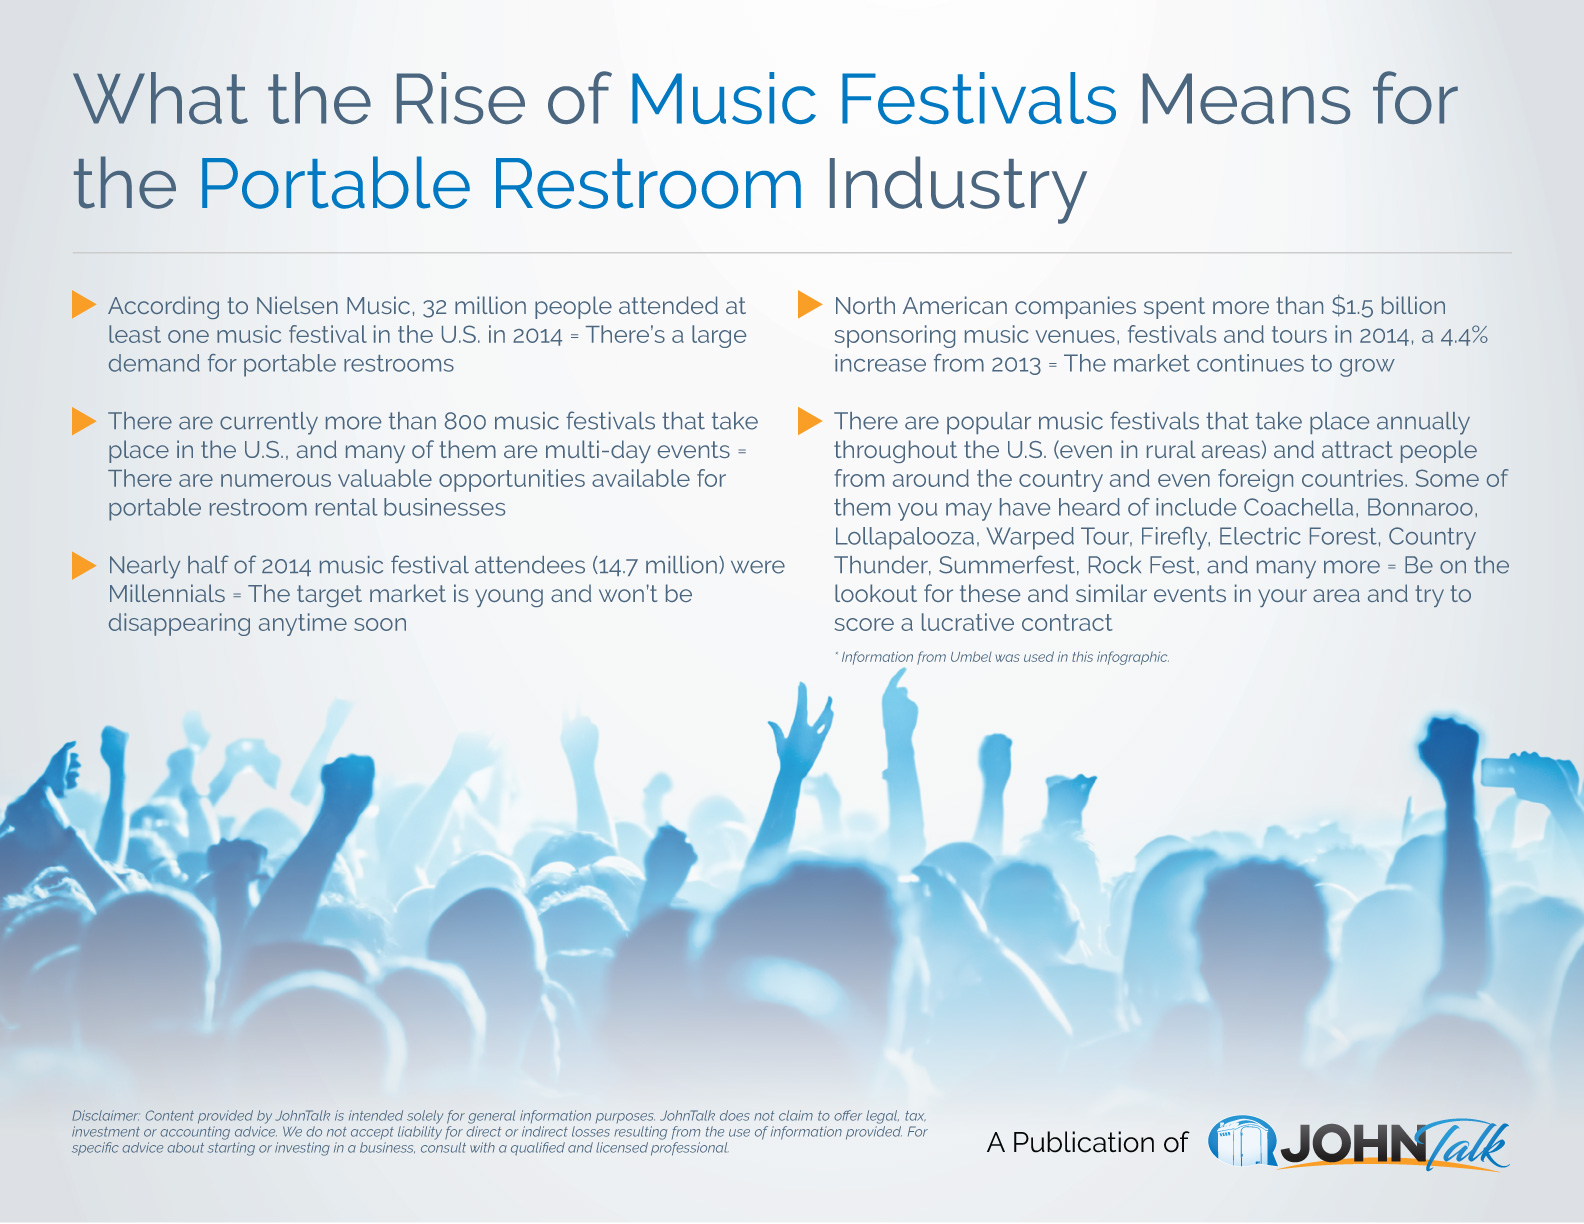 What the Rise of Music Festivals Means for the Portable Restroom Industry